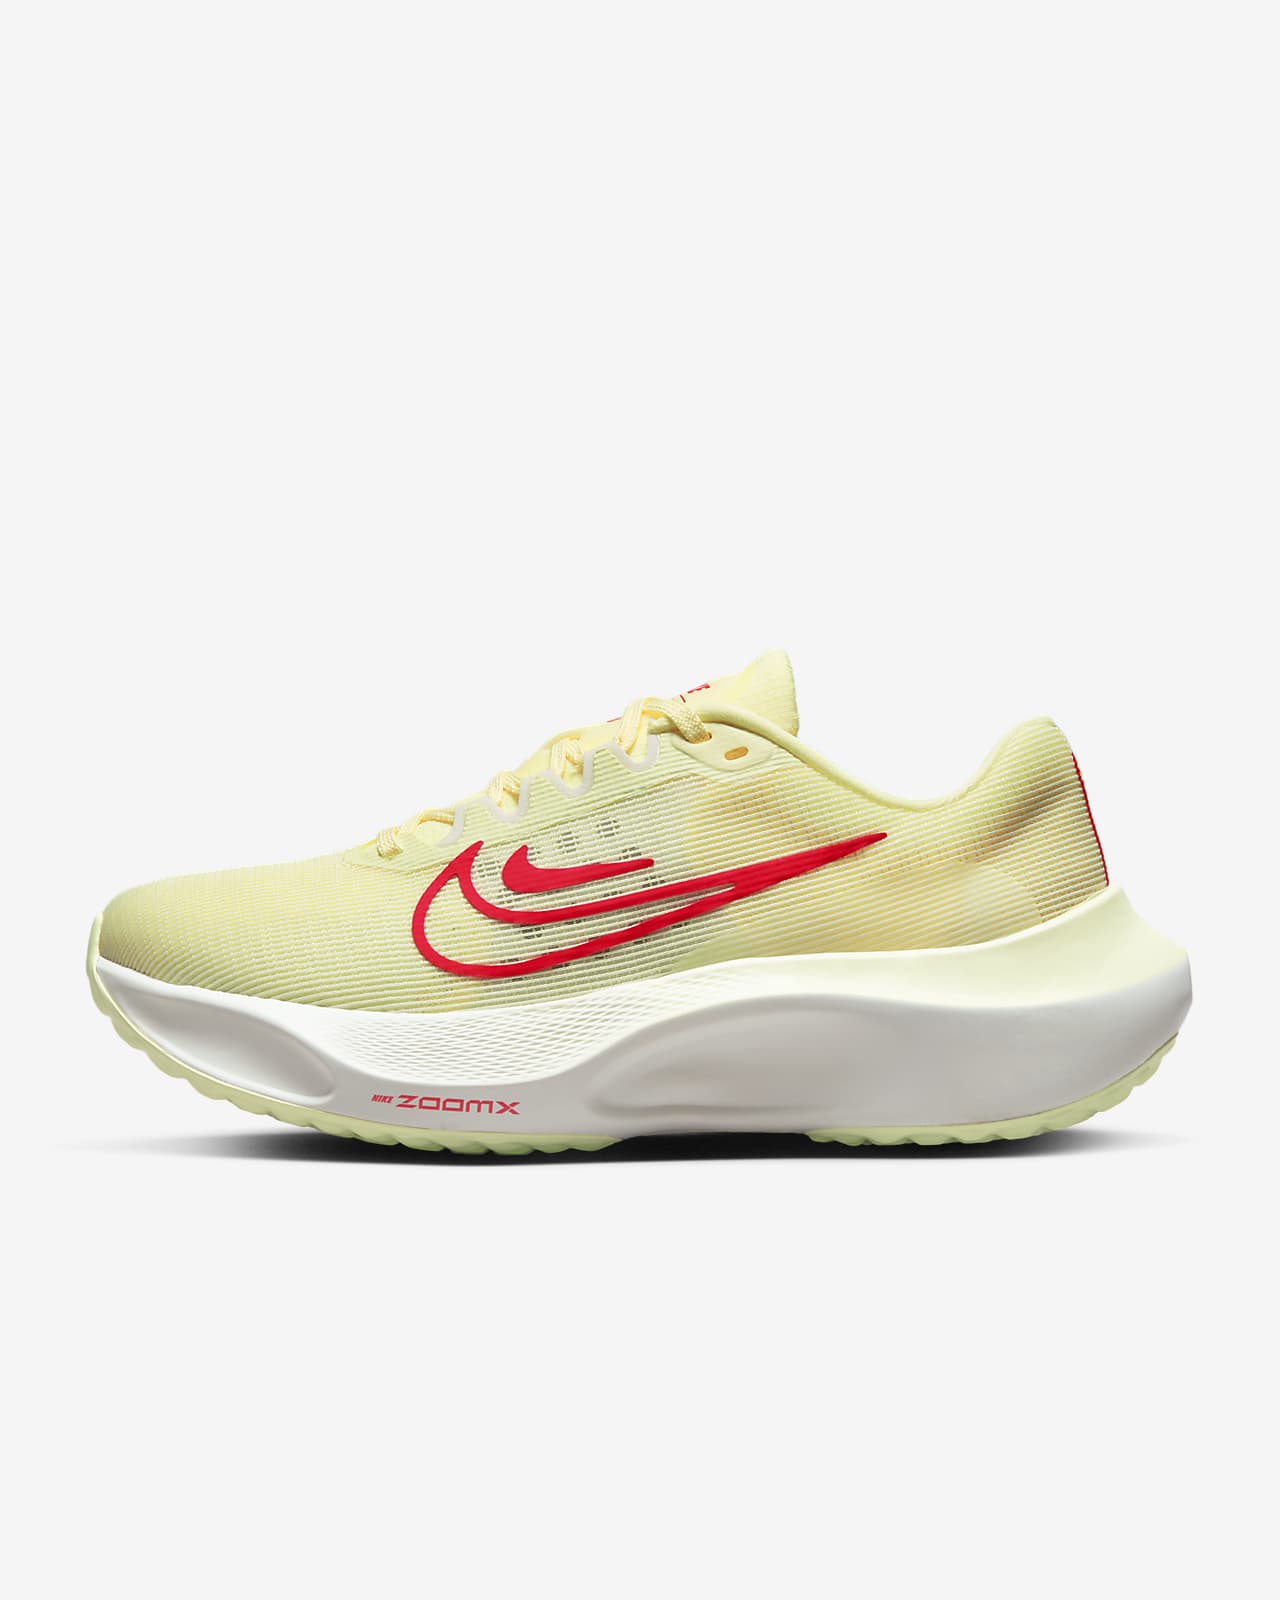 Nike Zoom Fly 5 Women's Road Running Shoes. Nike NL